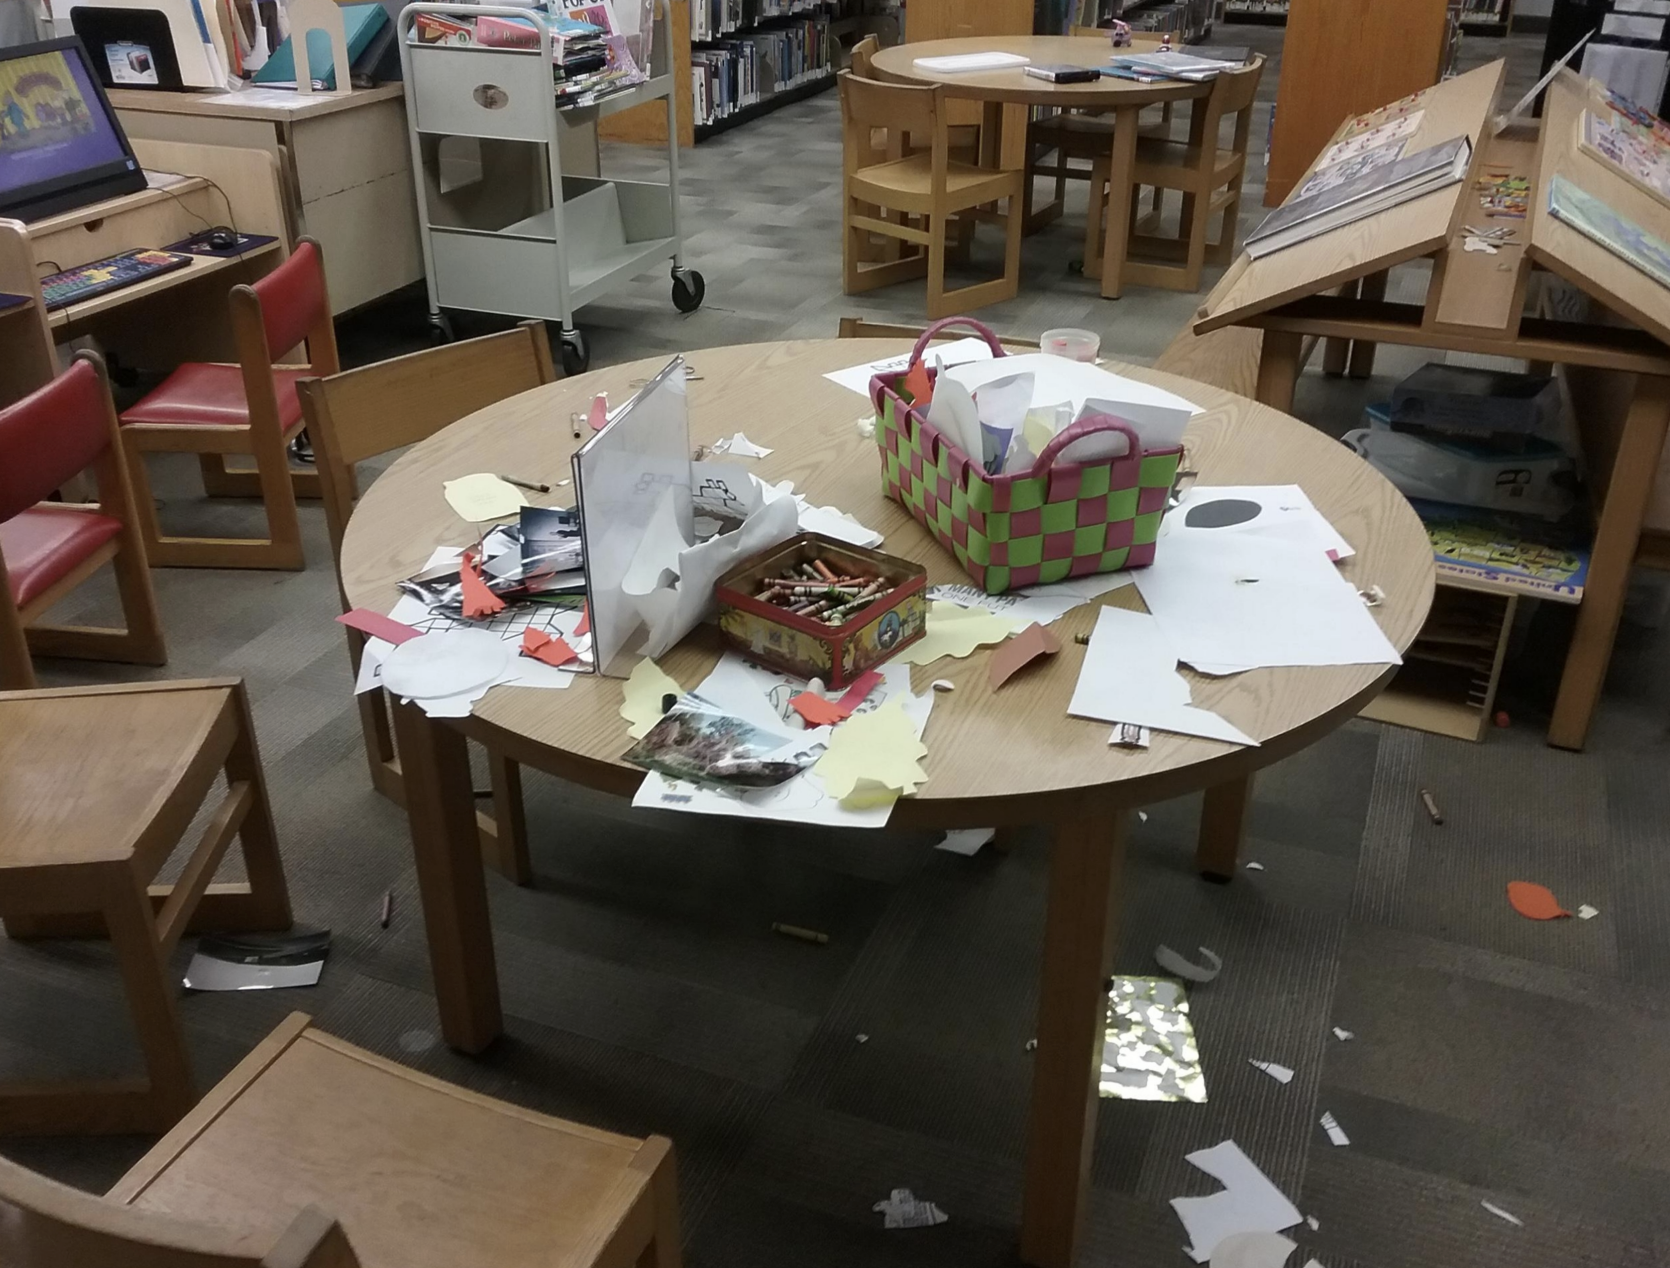 A messy table in a library